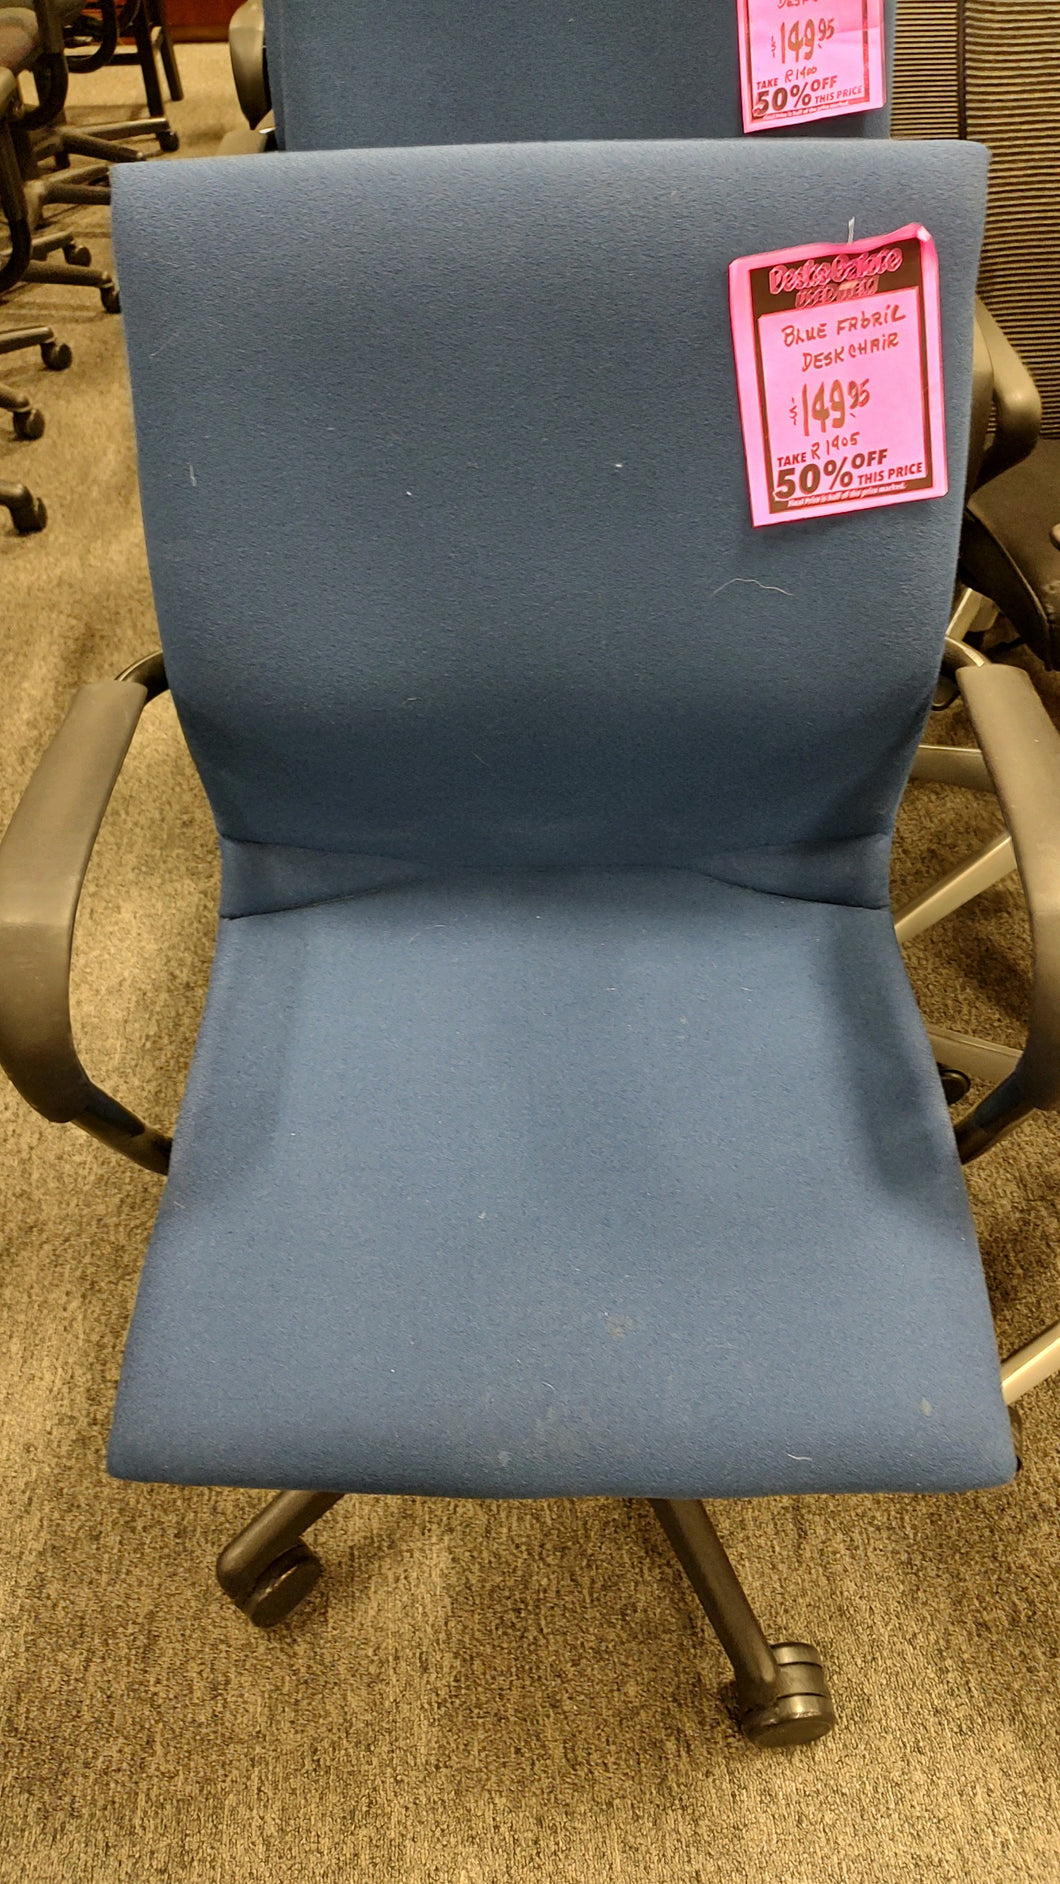 R1402 Blue Fabric Used Chair $74.98